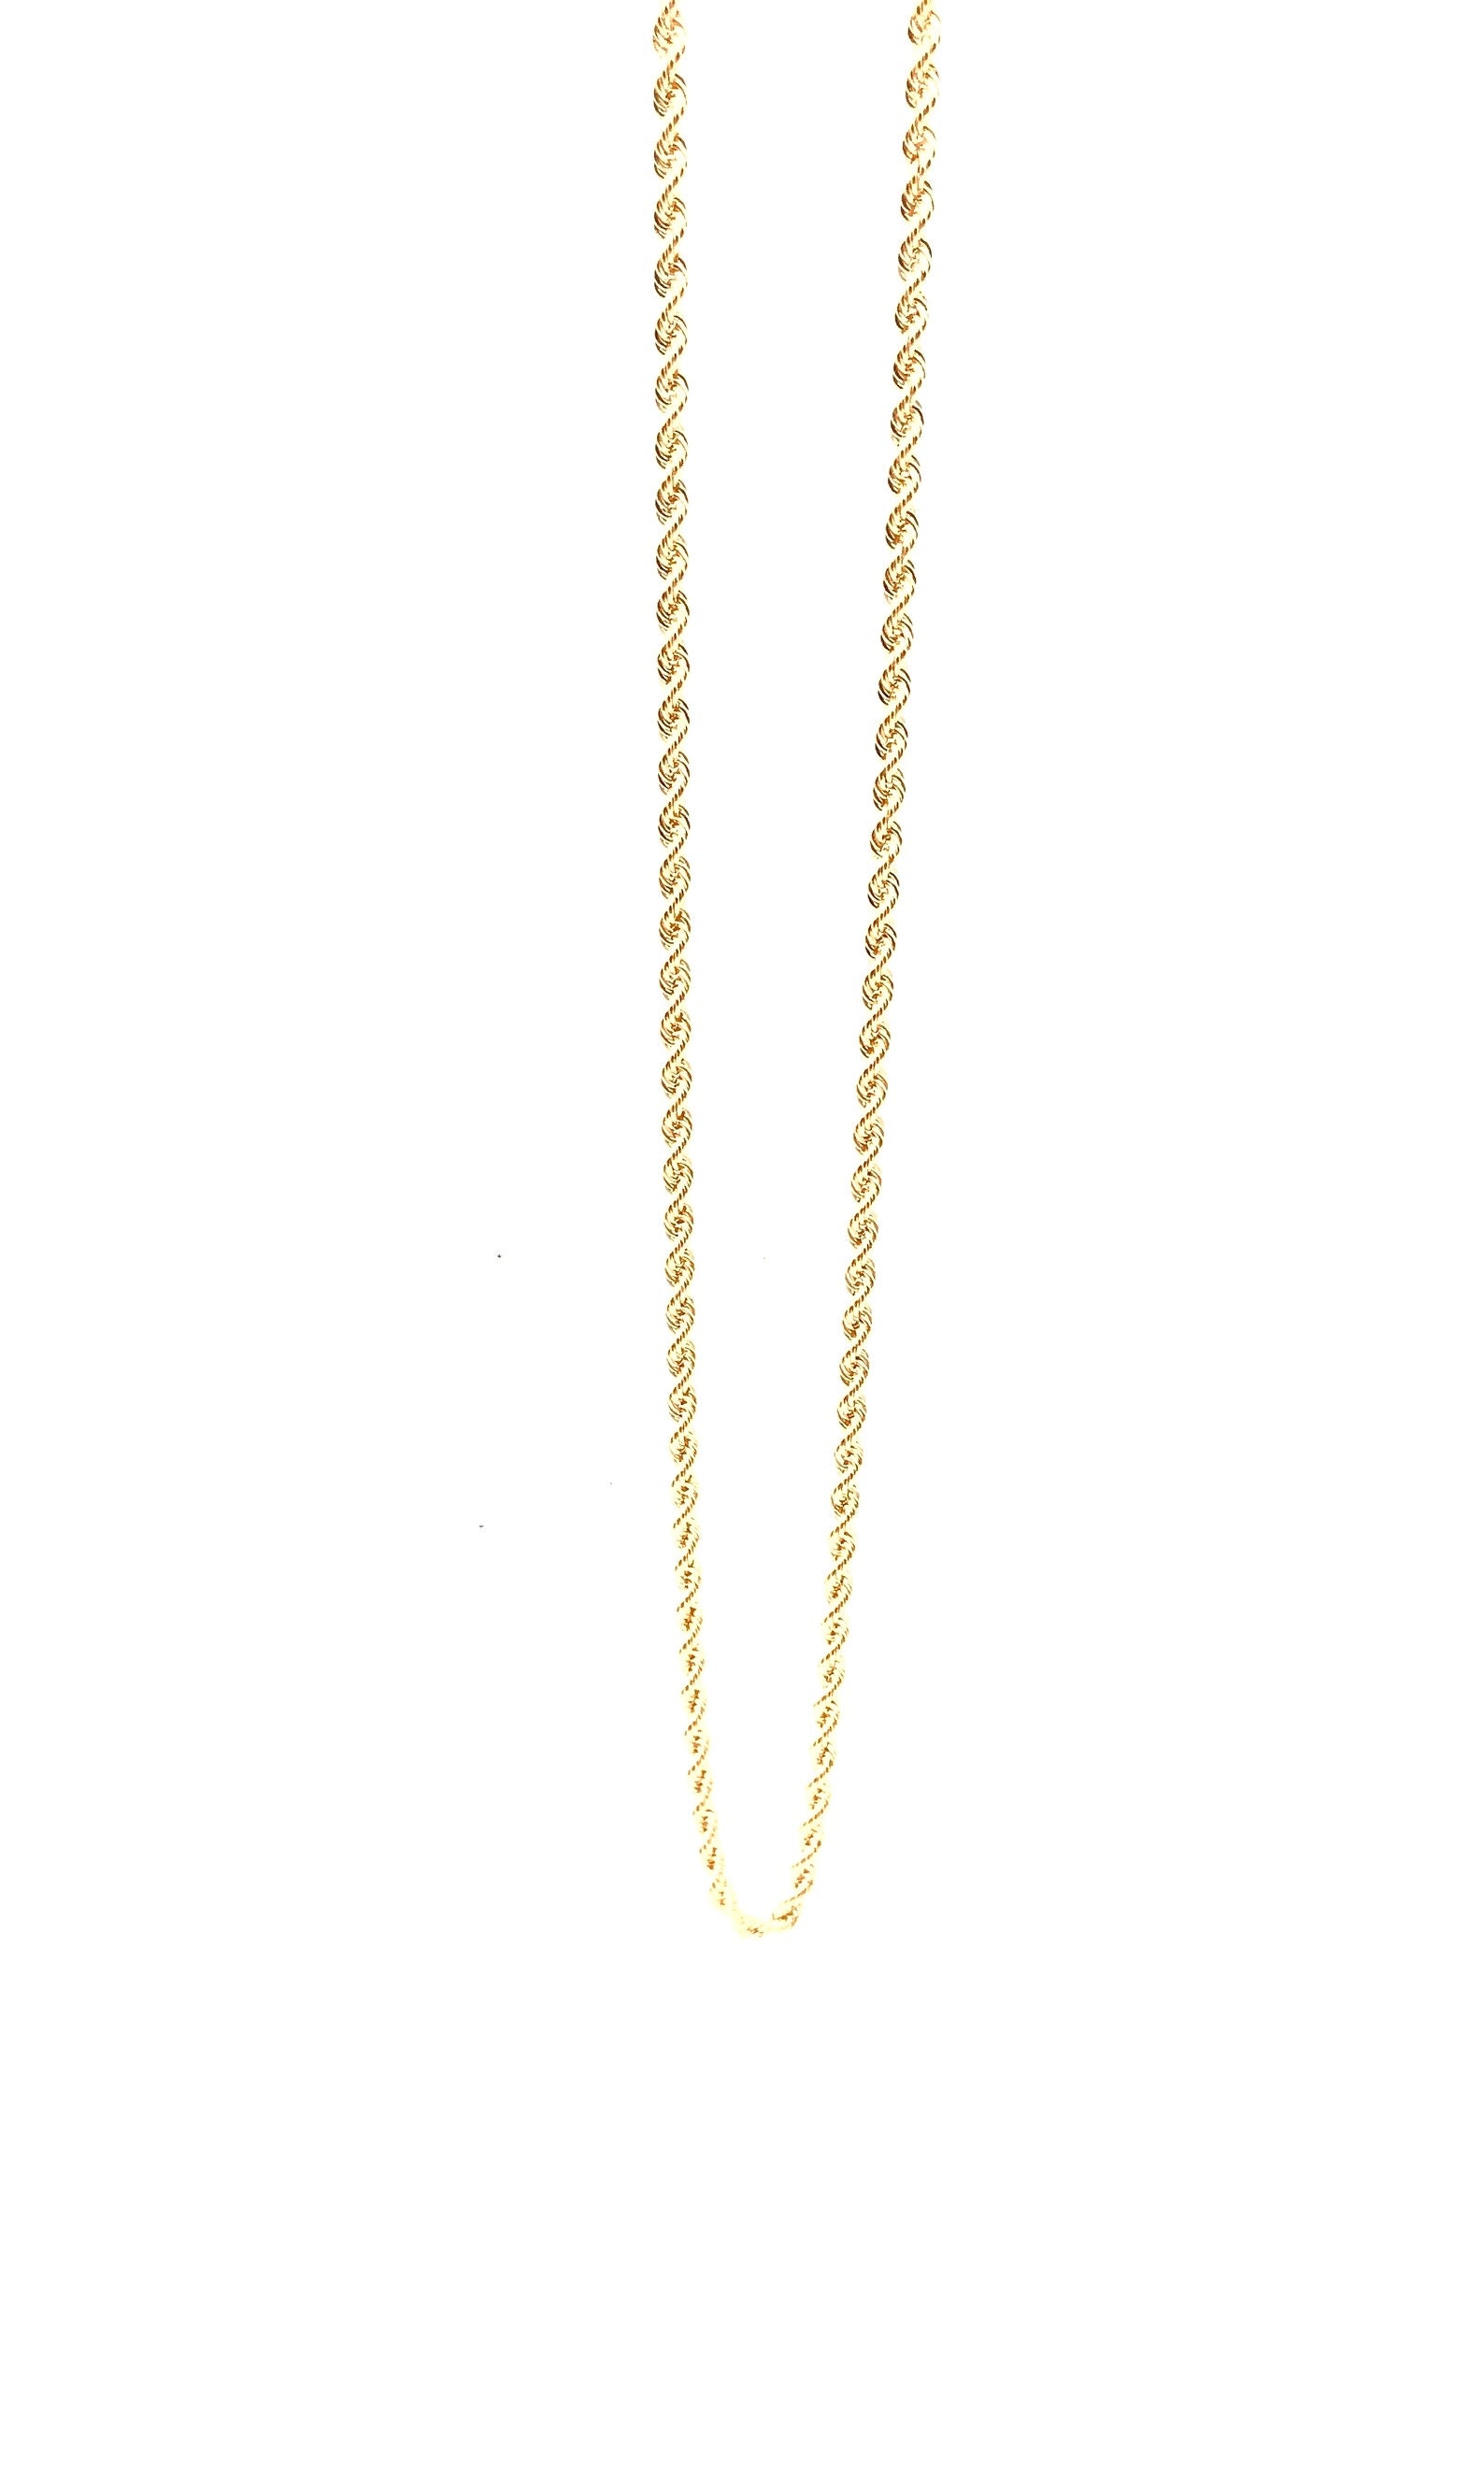 Solid 14K Yellow Gold 20 inch Chain 1.5mm Figure Eight Twist Men Ladies Necklace